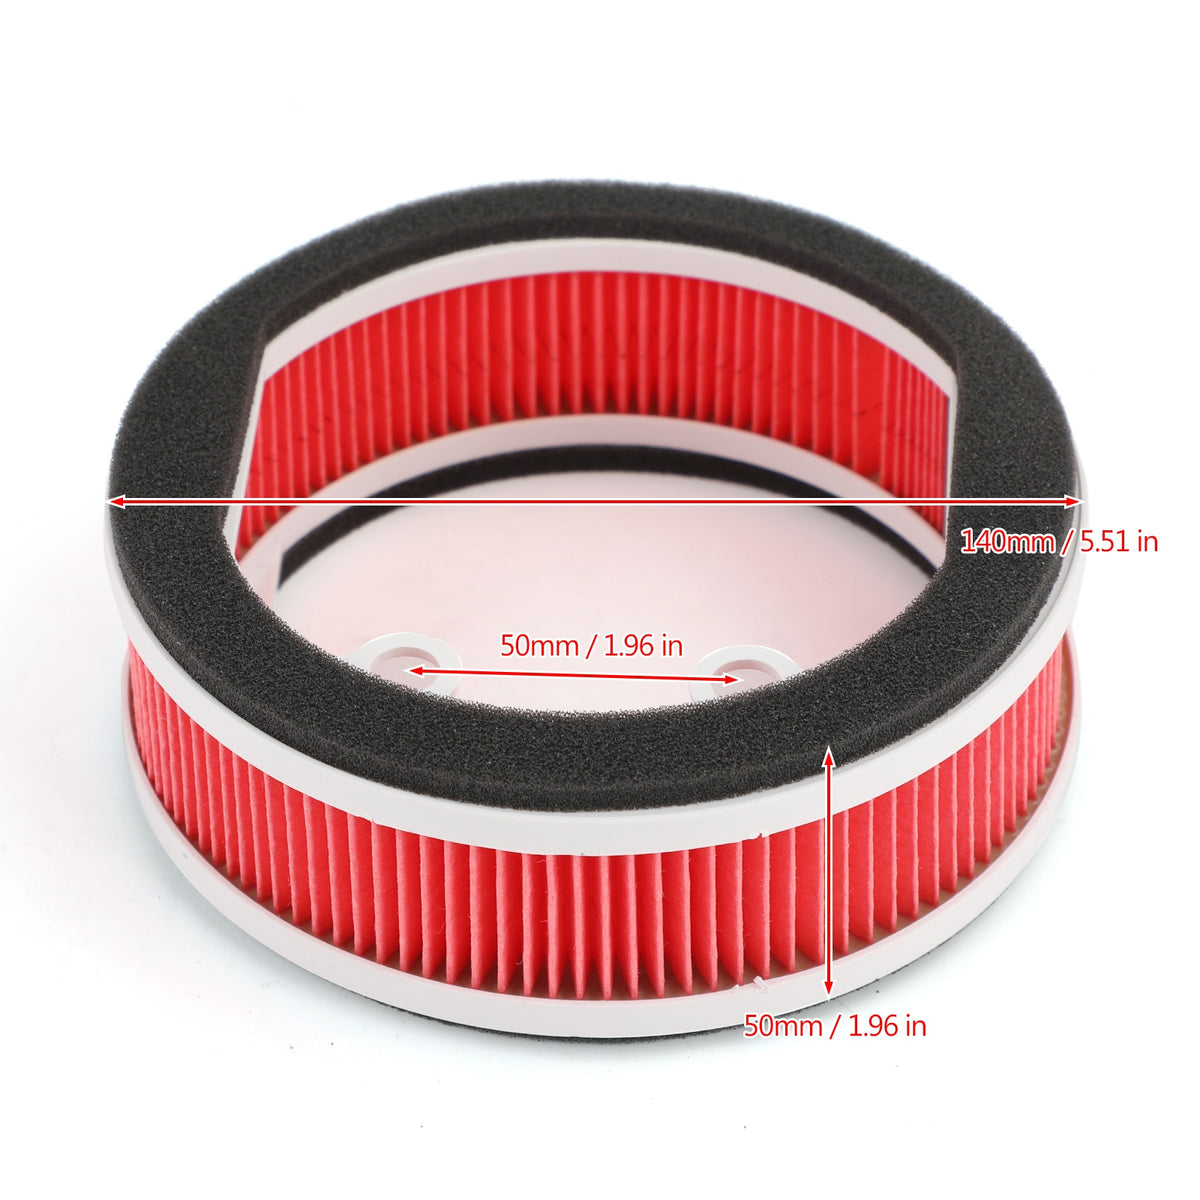 AIR FILTER TRANSMISSION Fit for Yamaha SMAX S-MAX 155 FORCE 15-20 52S-E5408-00